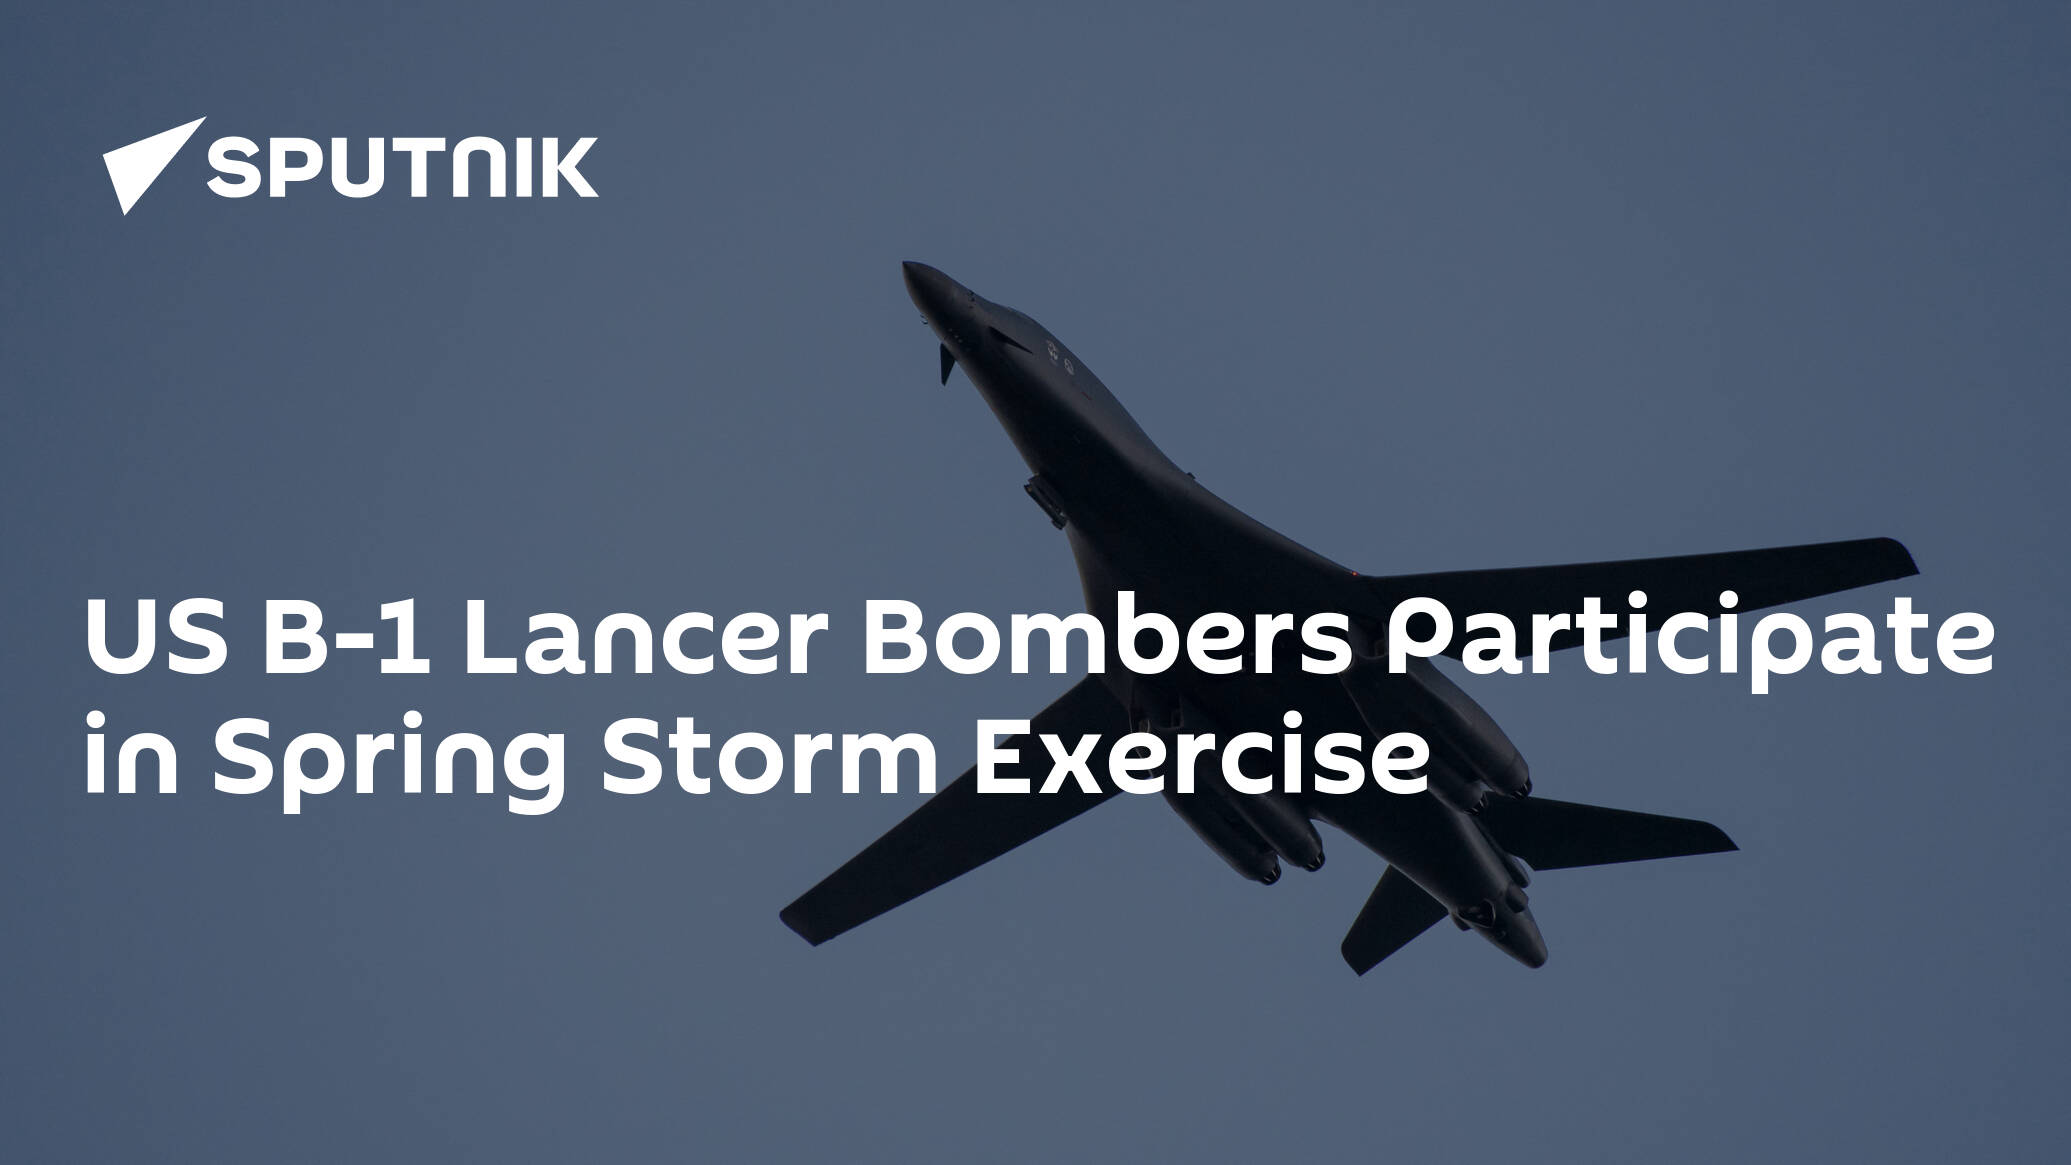 US B-1 Lancer Bombers Participate in Spring Storm Exercise